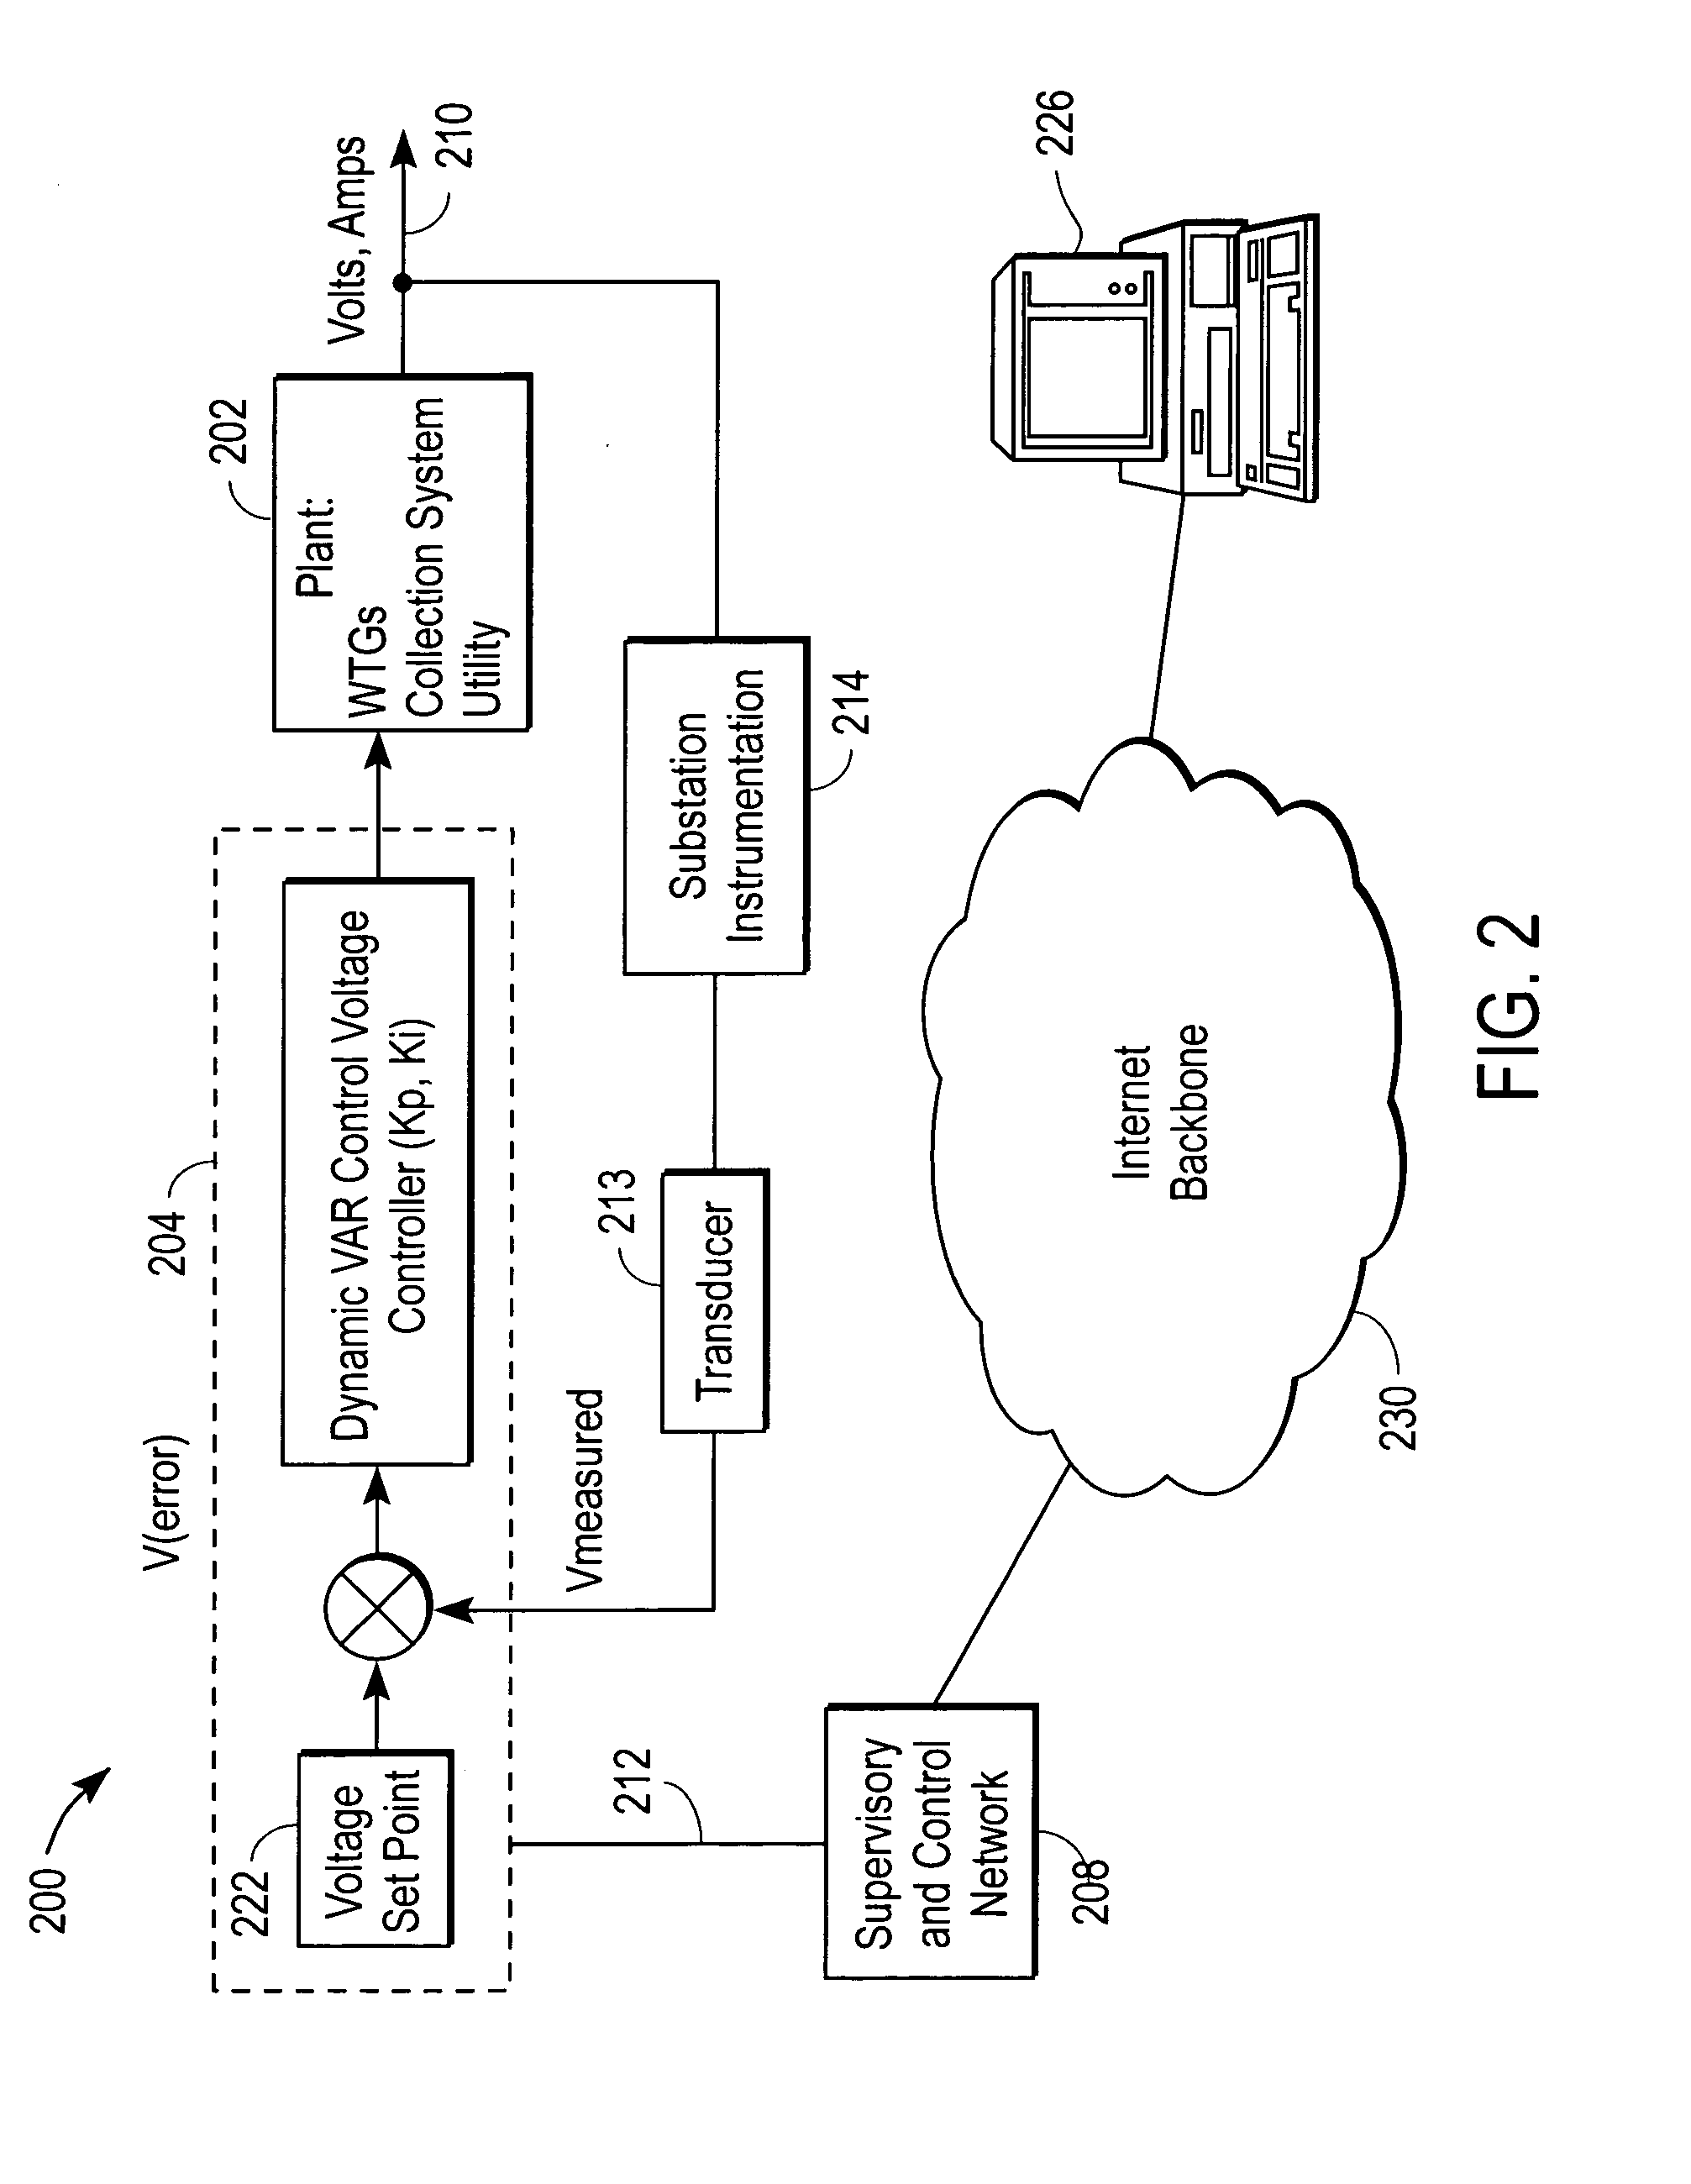 Various methods and apparatuses to provide remote access to a wind turbine generator system